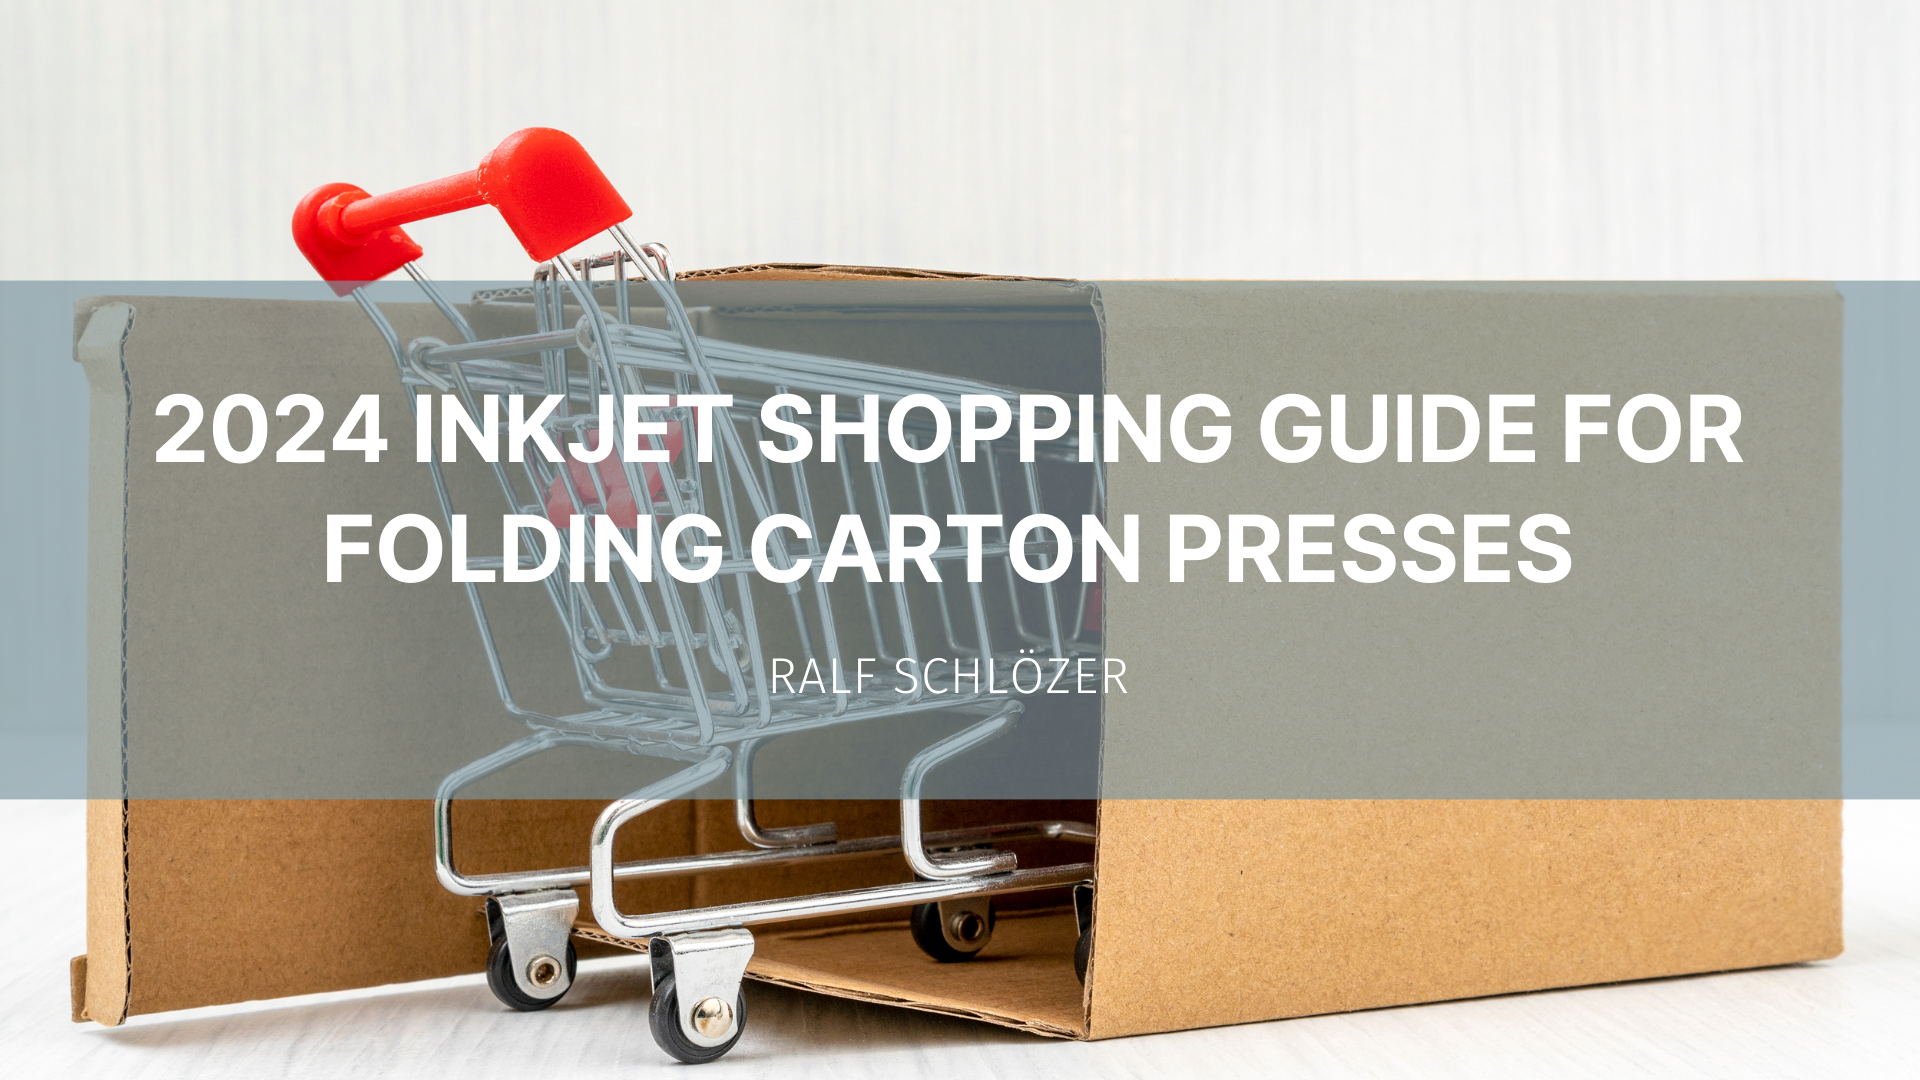 Featured image for “2024 Inkjet Shopping Guide for Folding Carton Presses”